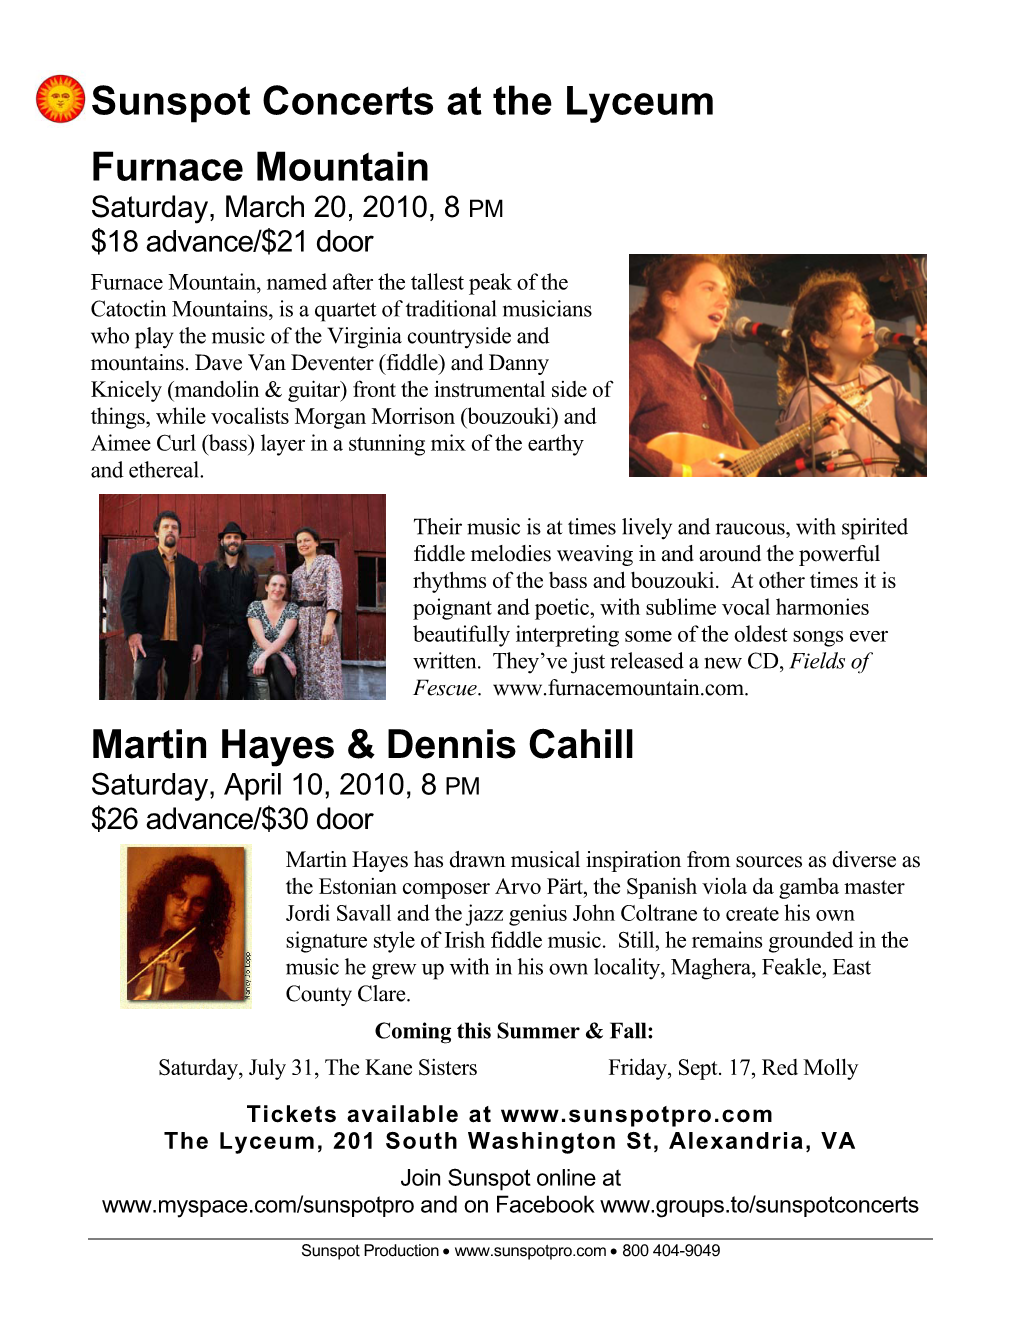 Sunspot Concerts at the Lyceum Furnace Mountain Martin Hayes